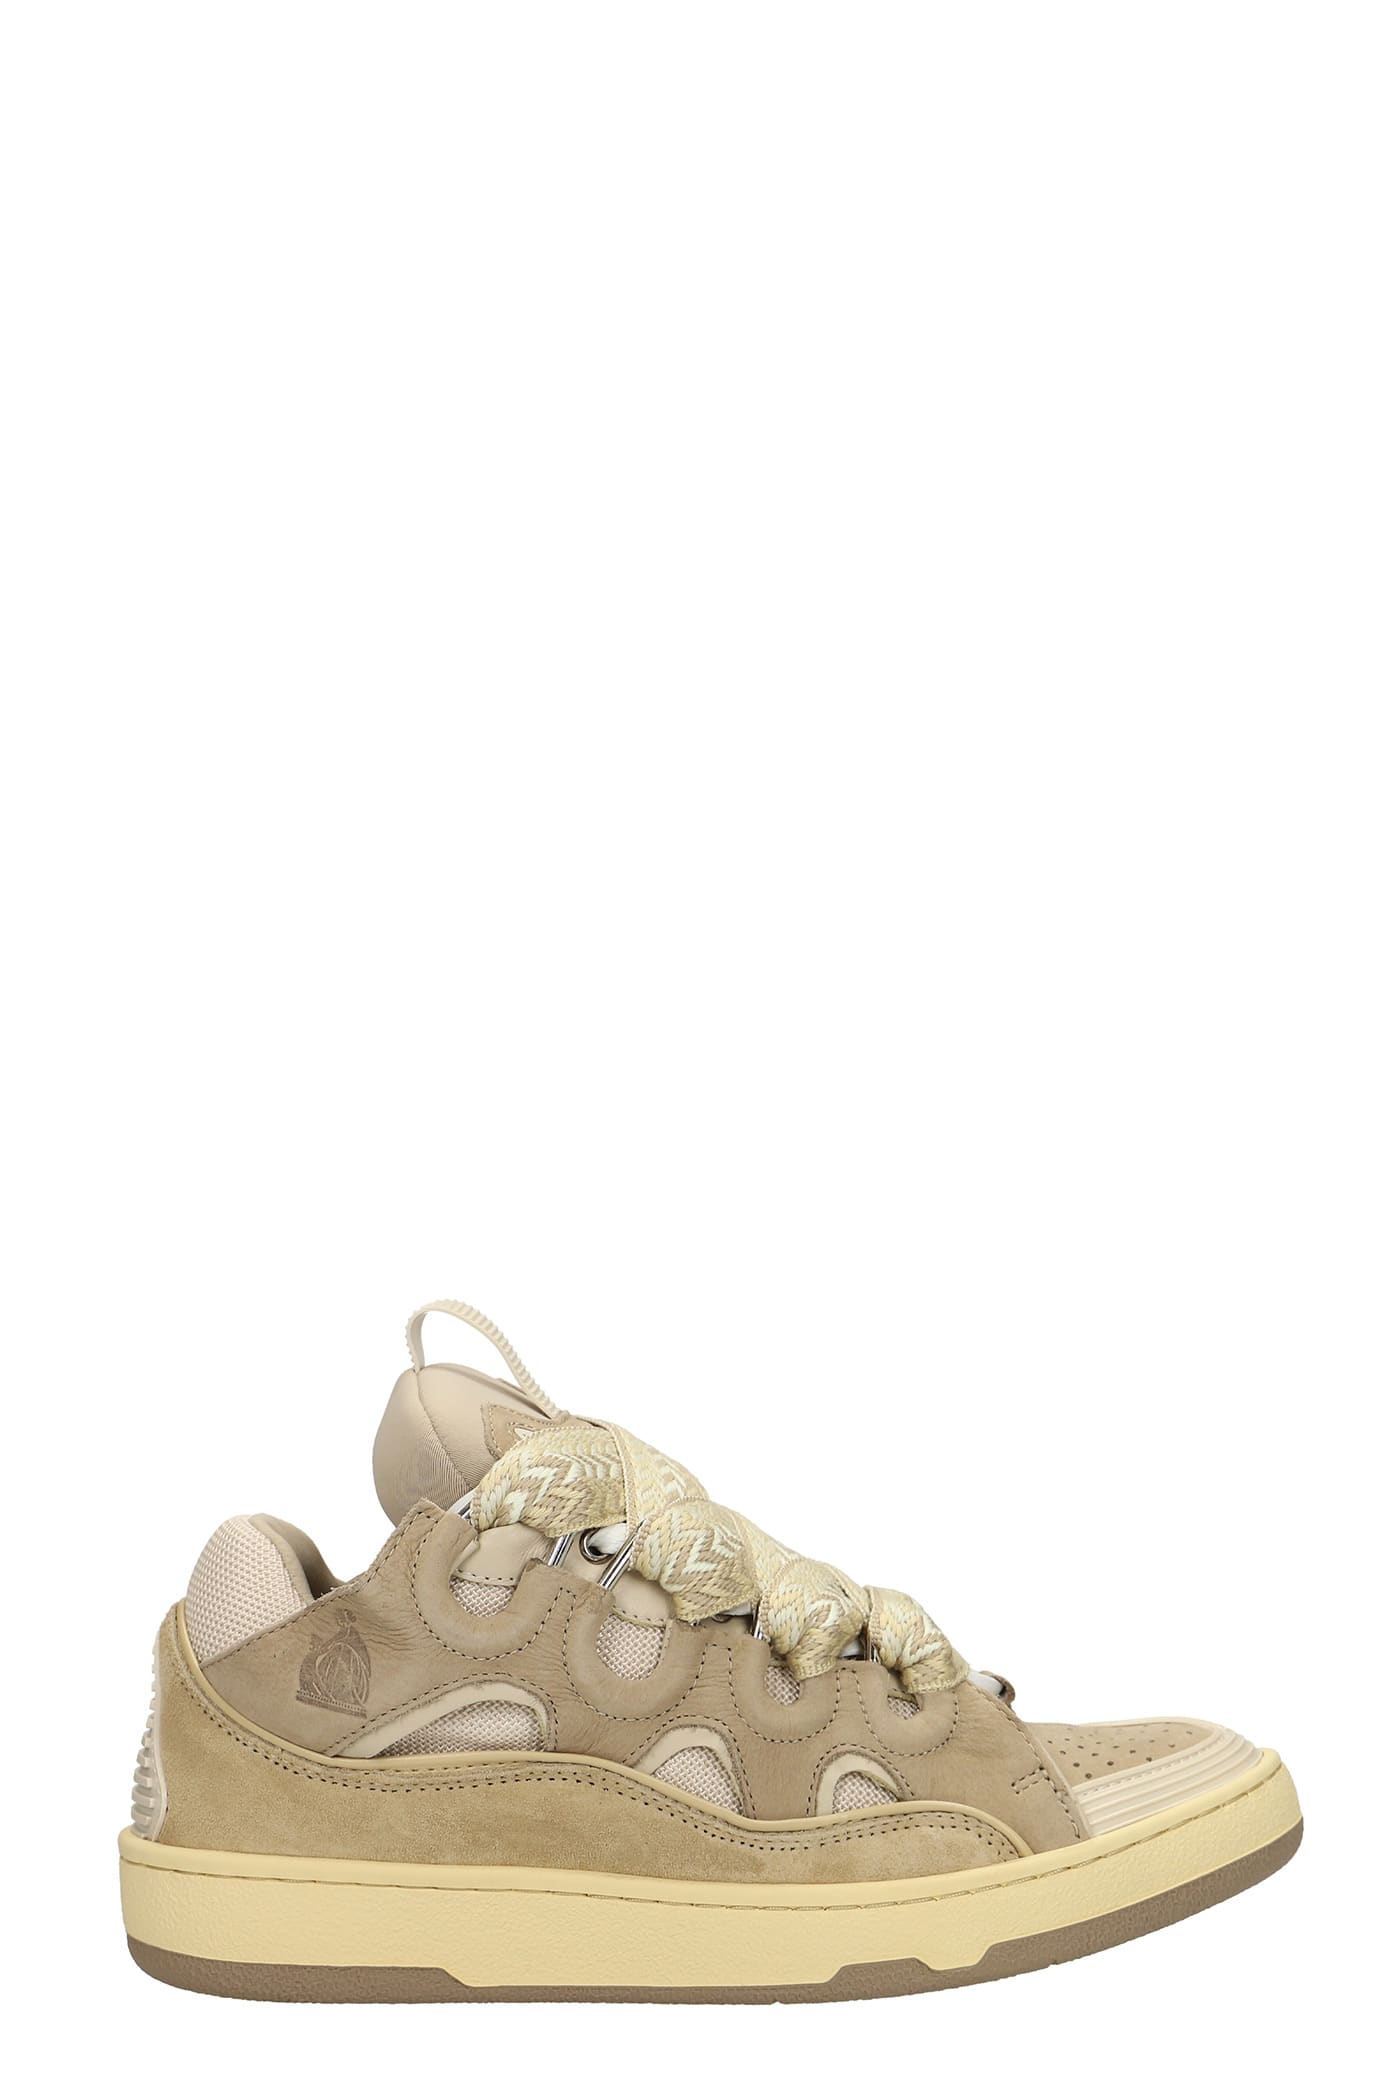 Lanvin Curb Sneakers In Beige Suede And Leather